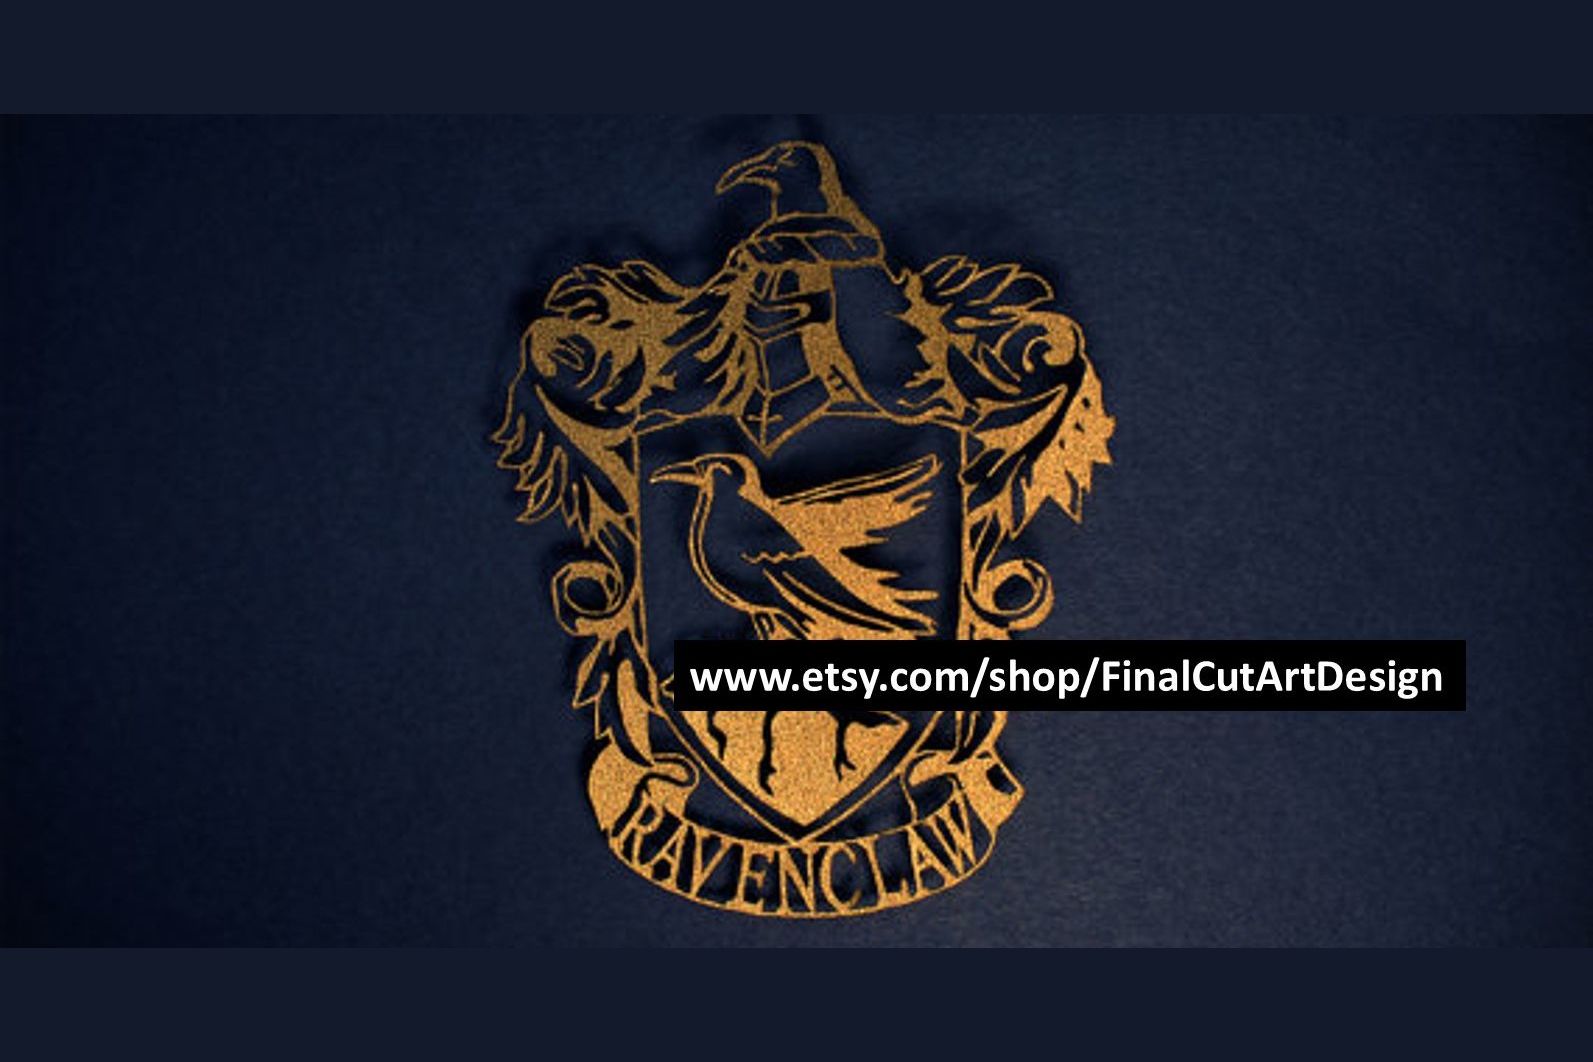 Great Gifts For The Wise Ravenclaws